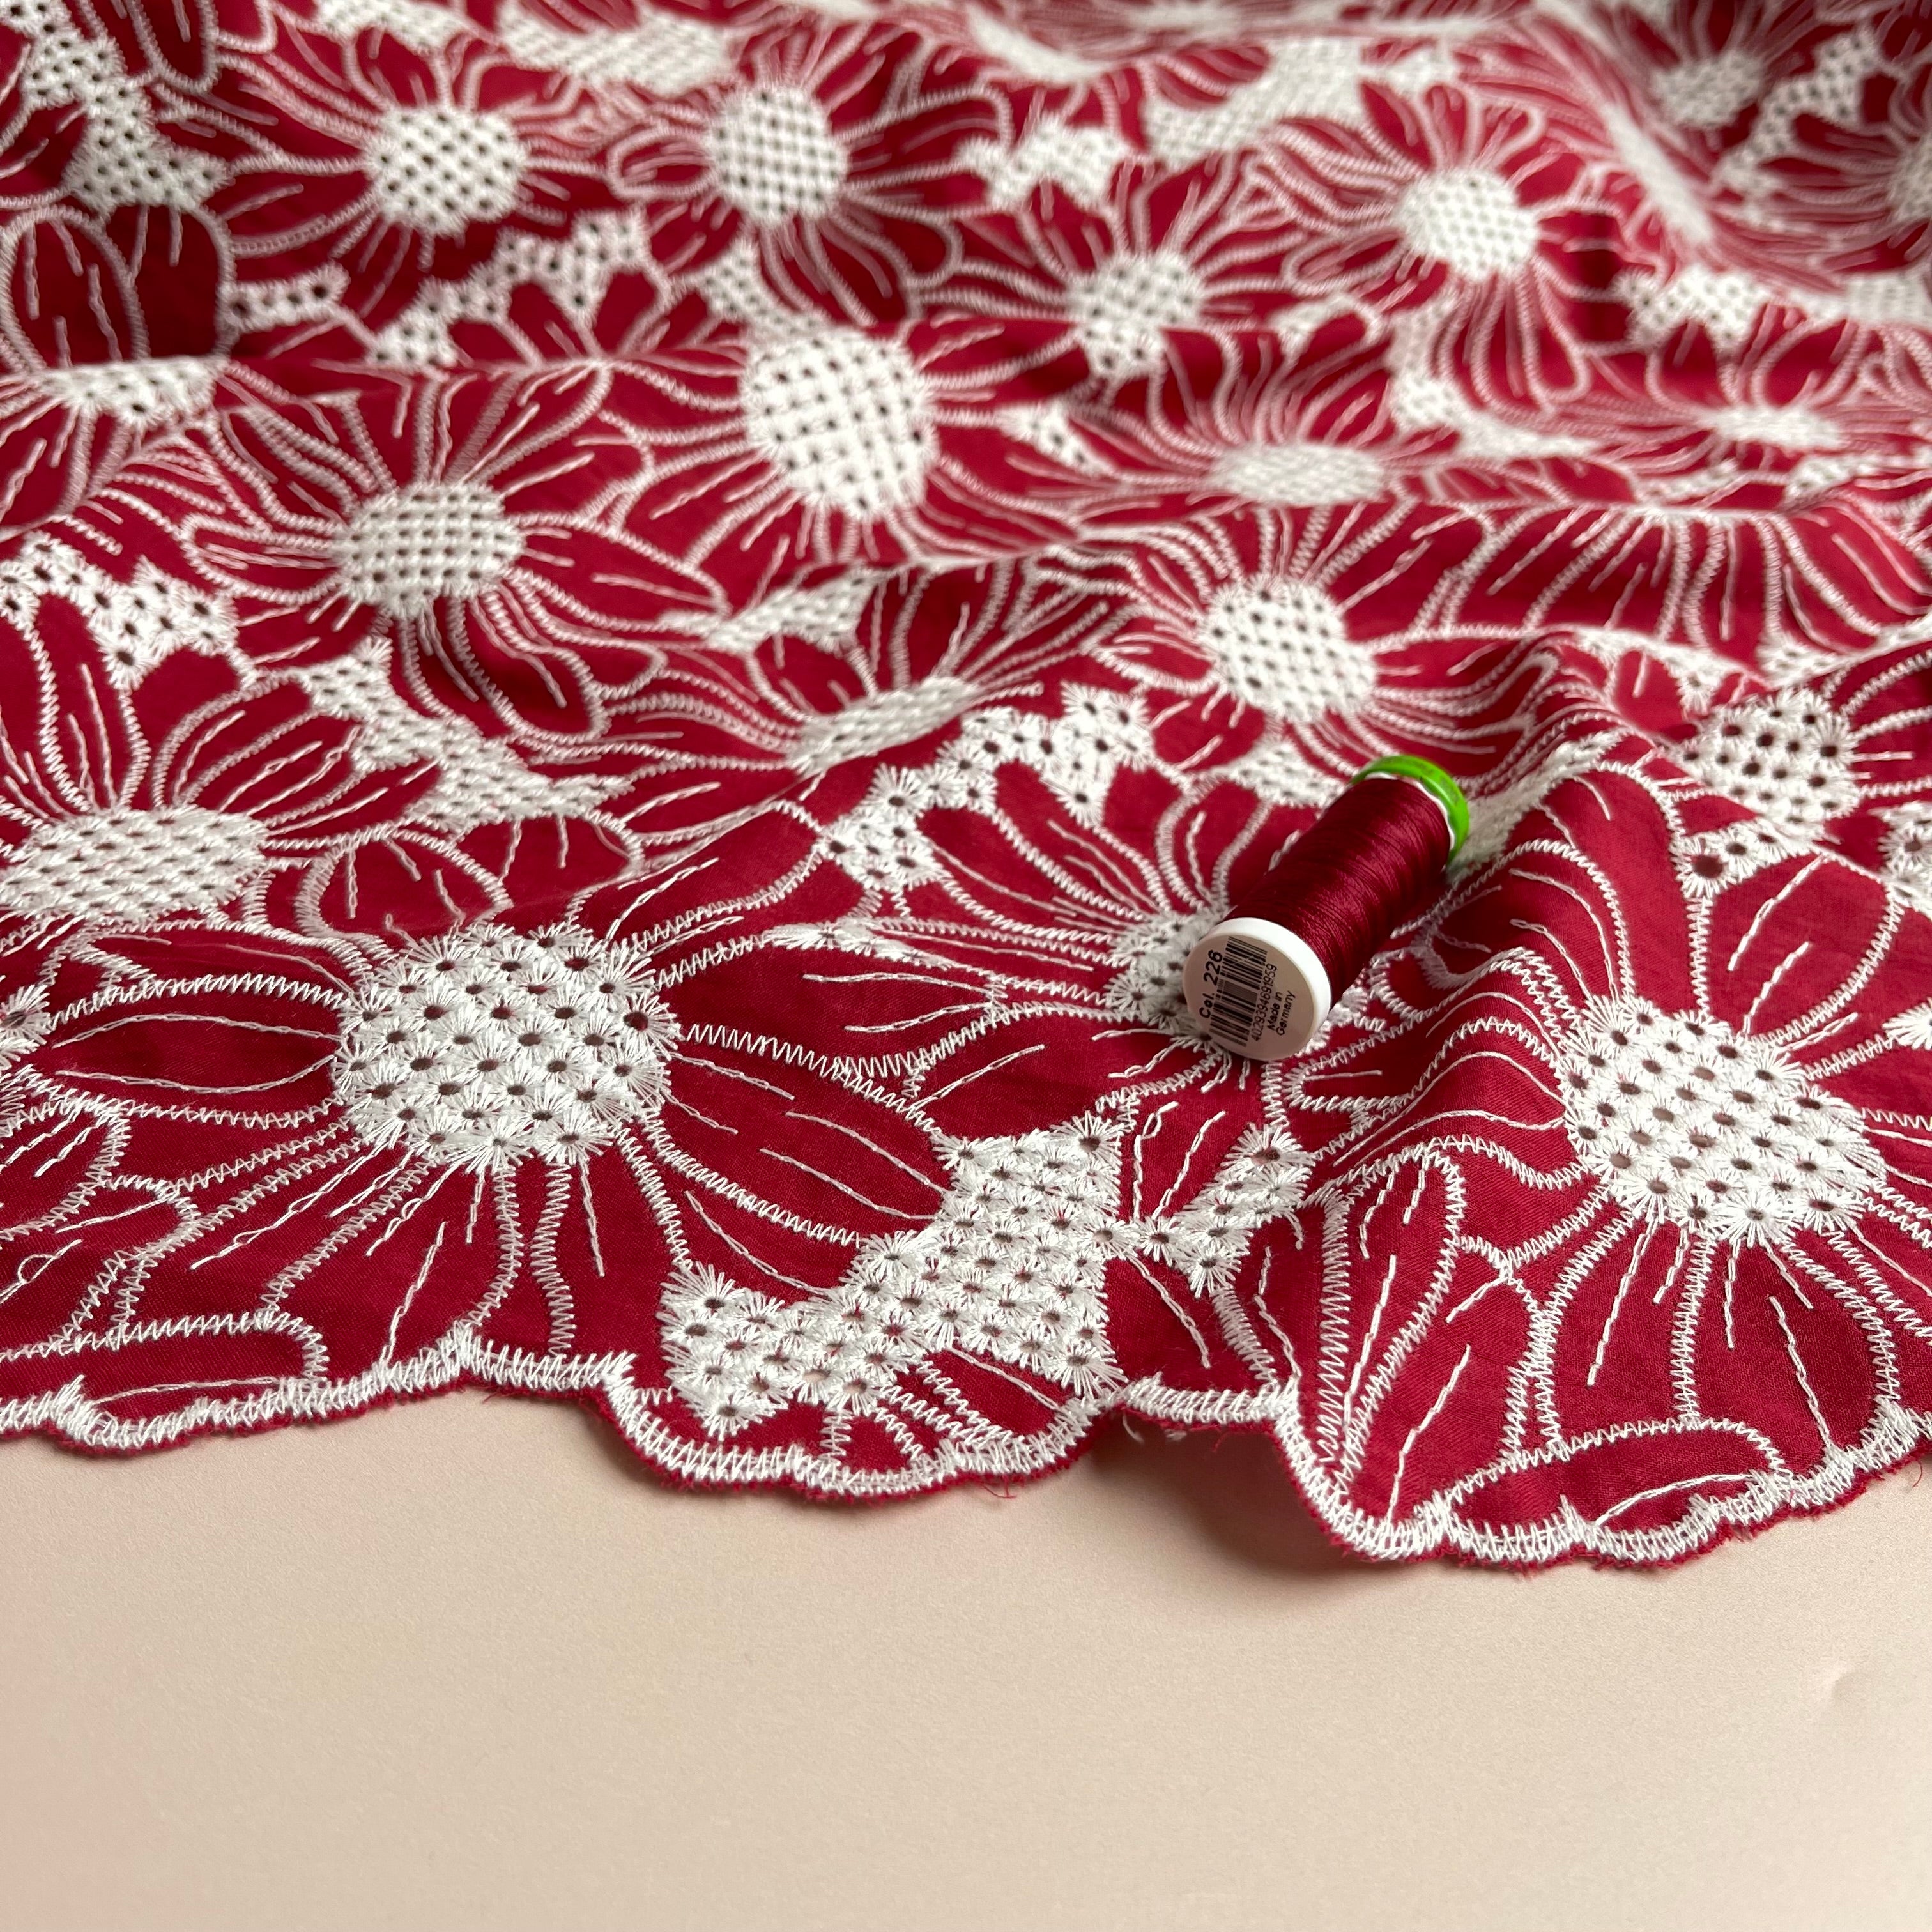 Scalloped Flowers Embroidered Cotton Fabric in Red